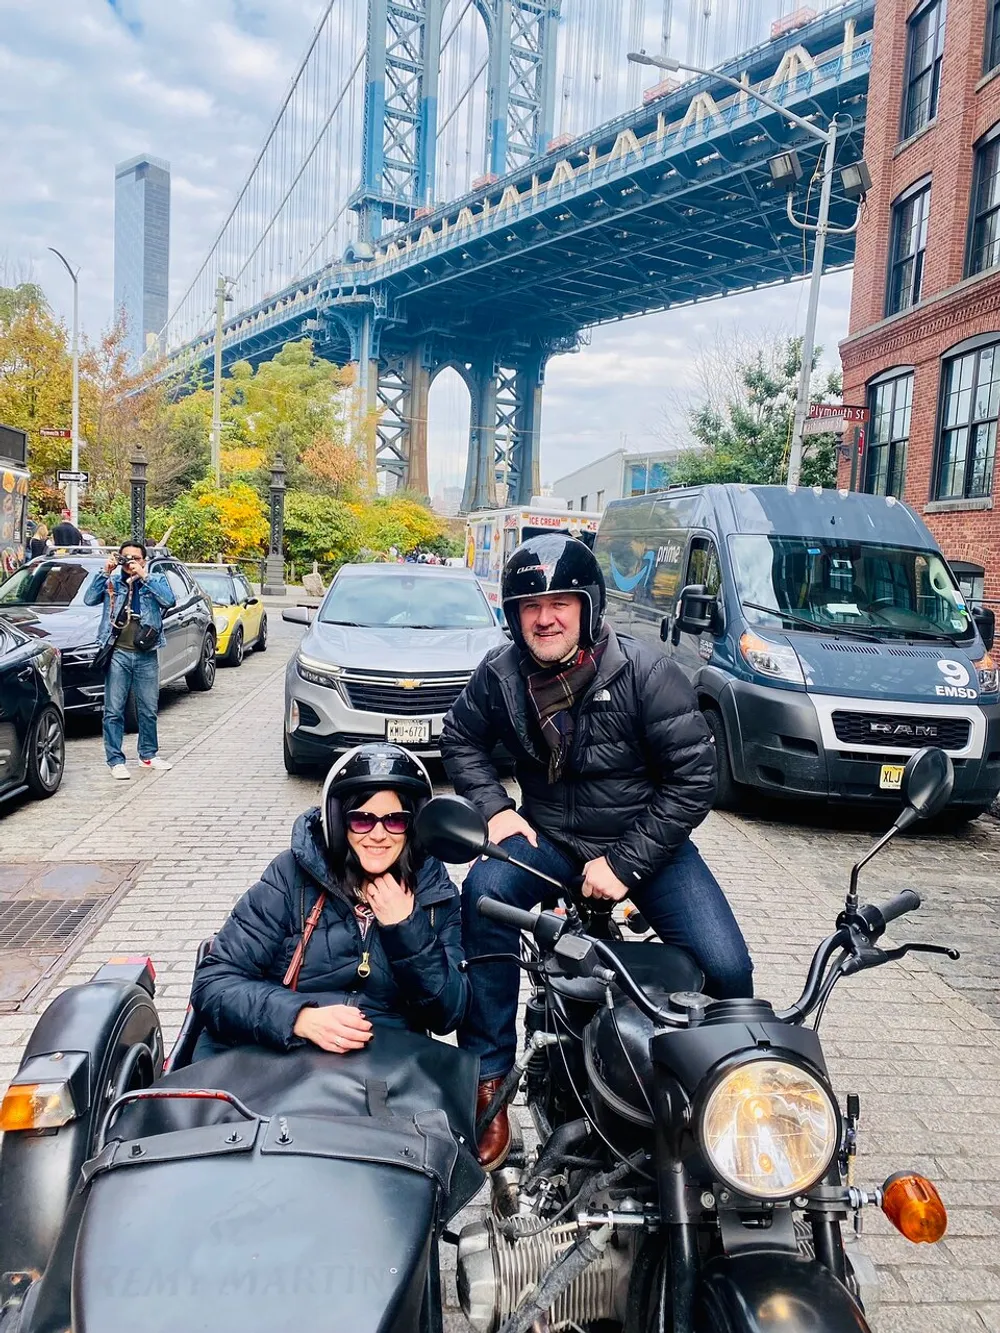 Two people are posing for a photo on a motorcycle with a sidecar in front of the Manhattan Bridge in New York City